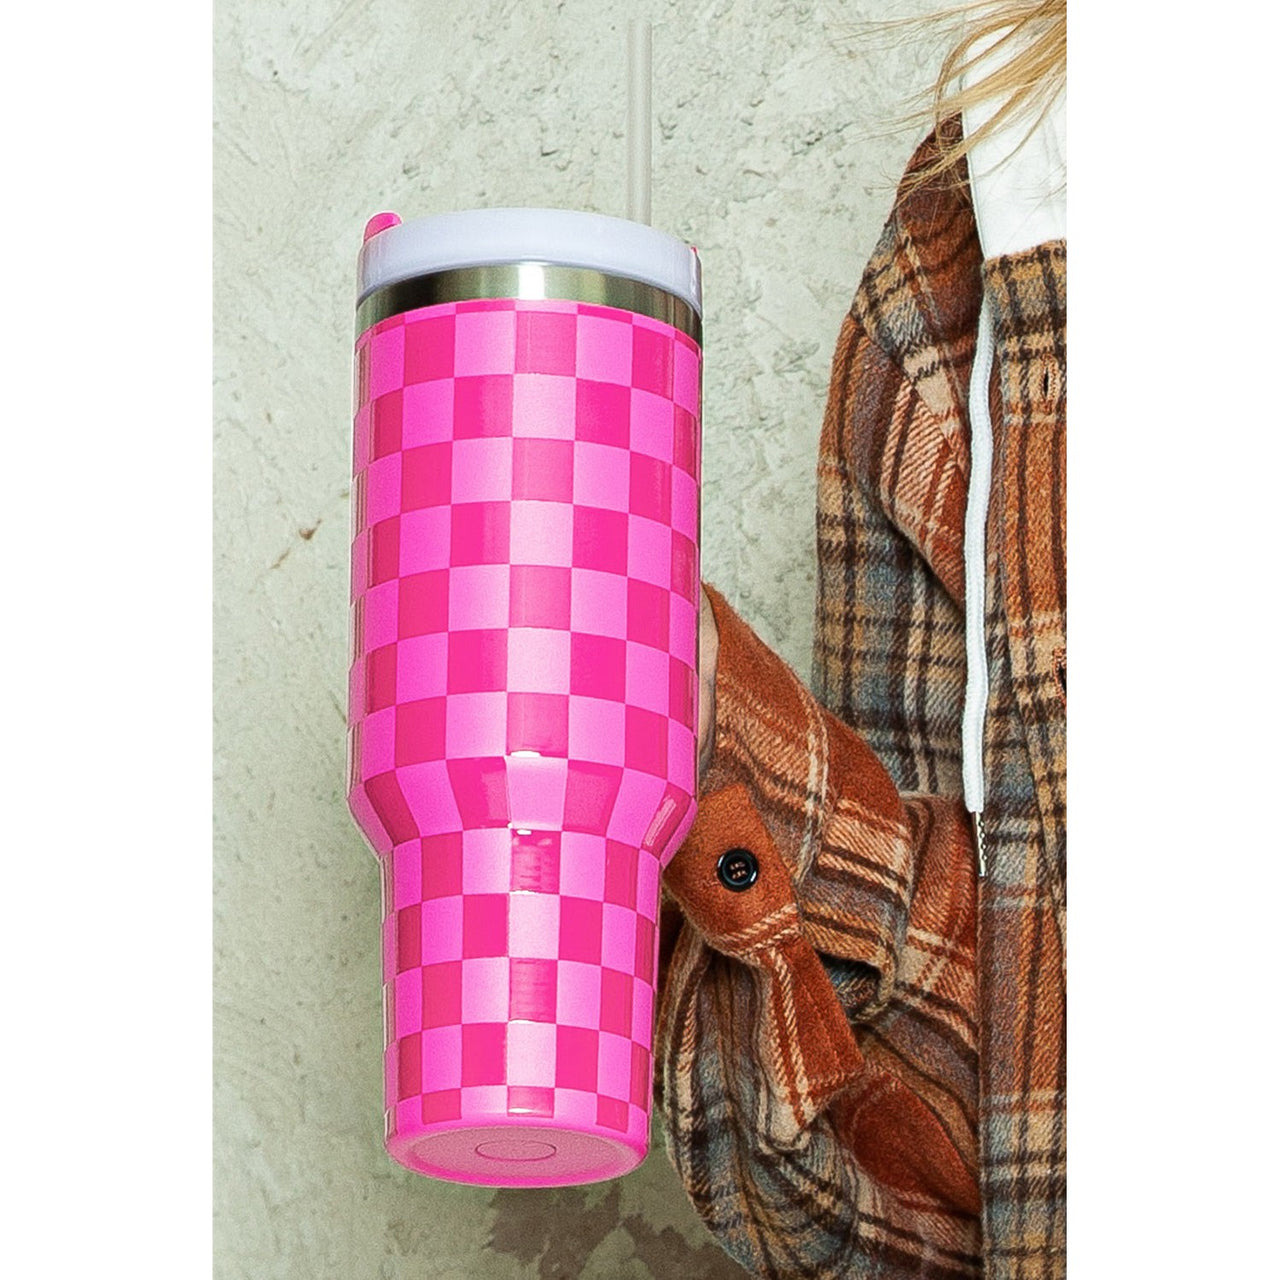 Dear Lover 40oz Checkered Print Handled Stainless Steel Tumbler Cup - Pink